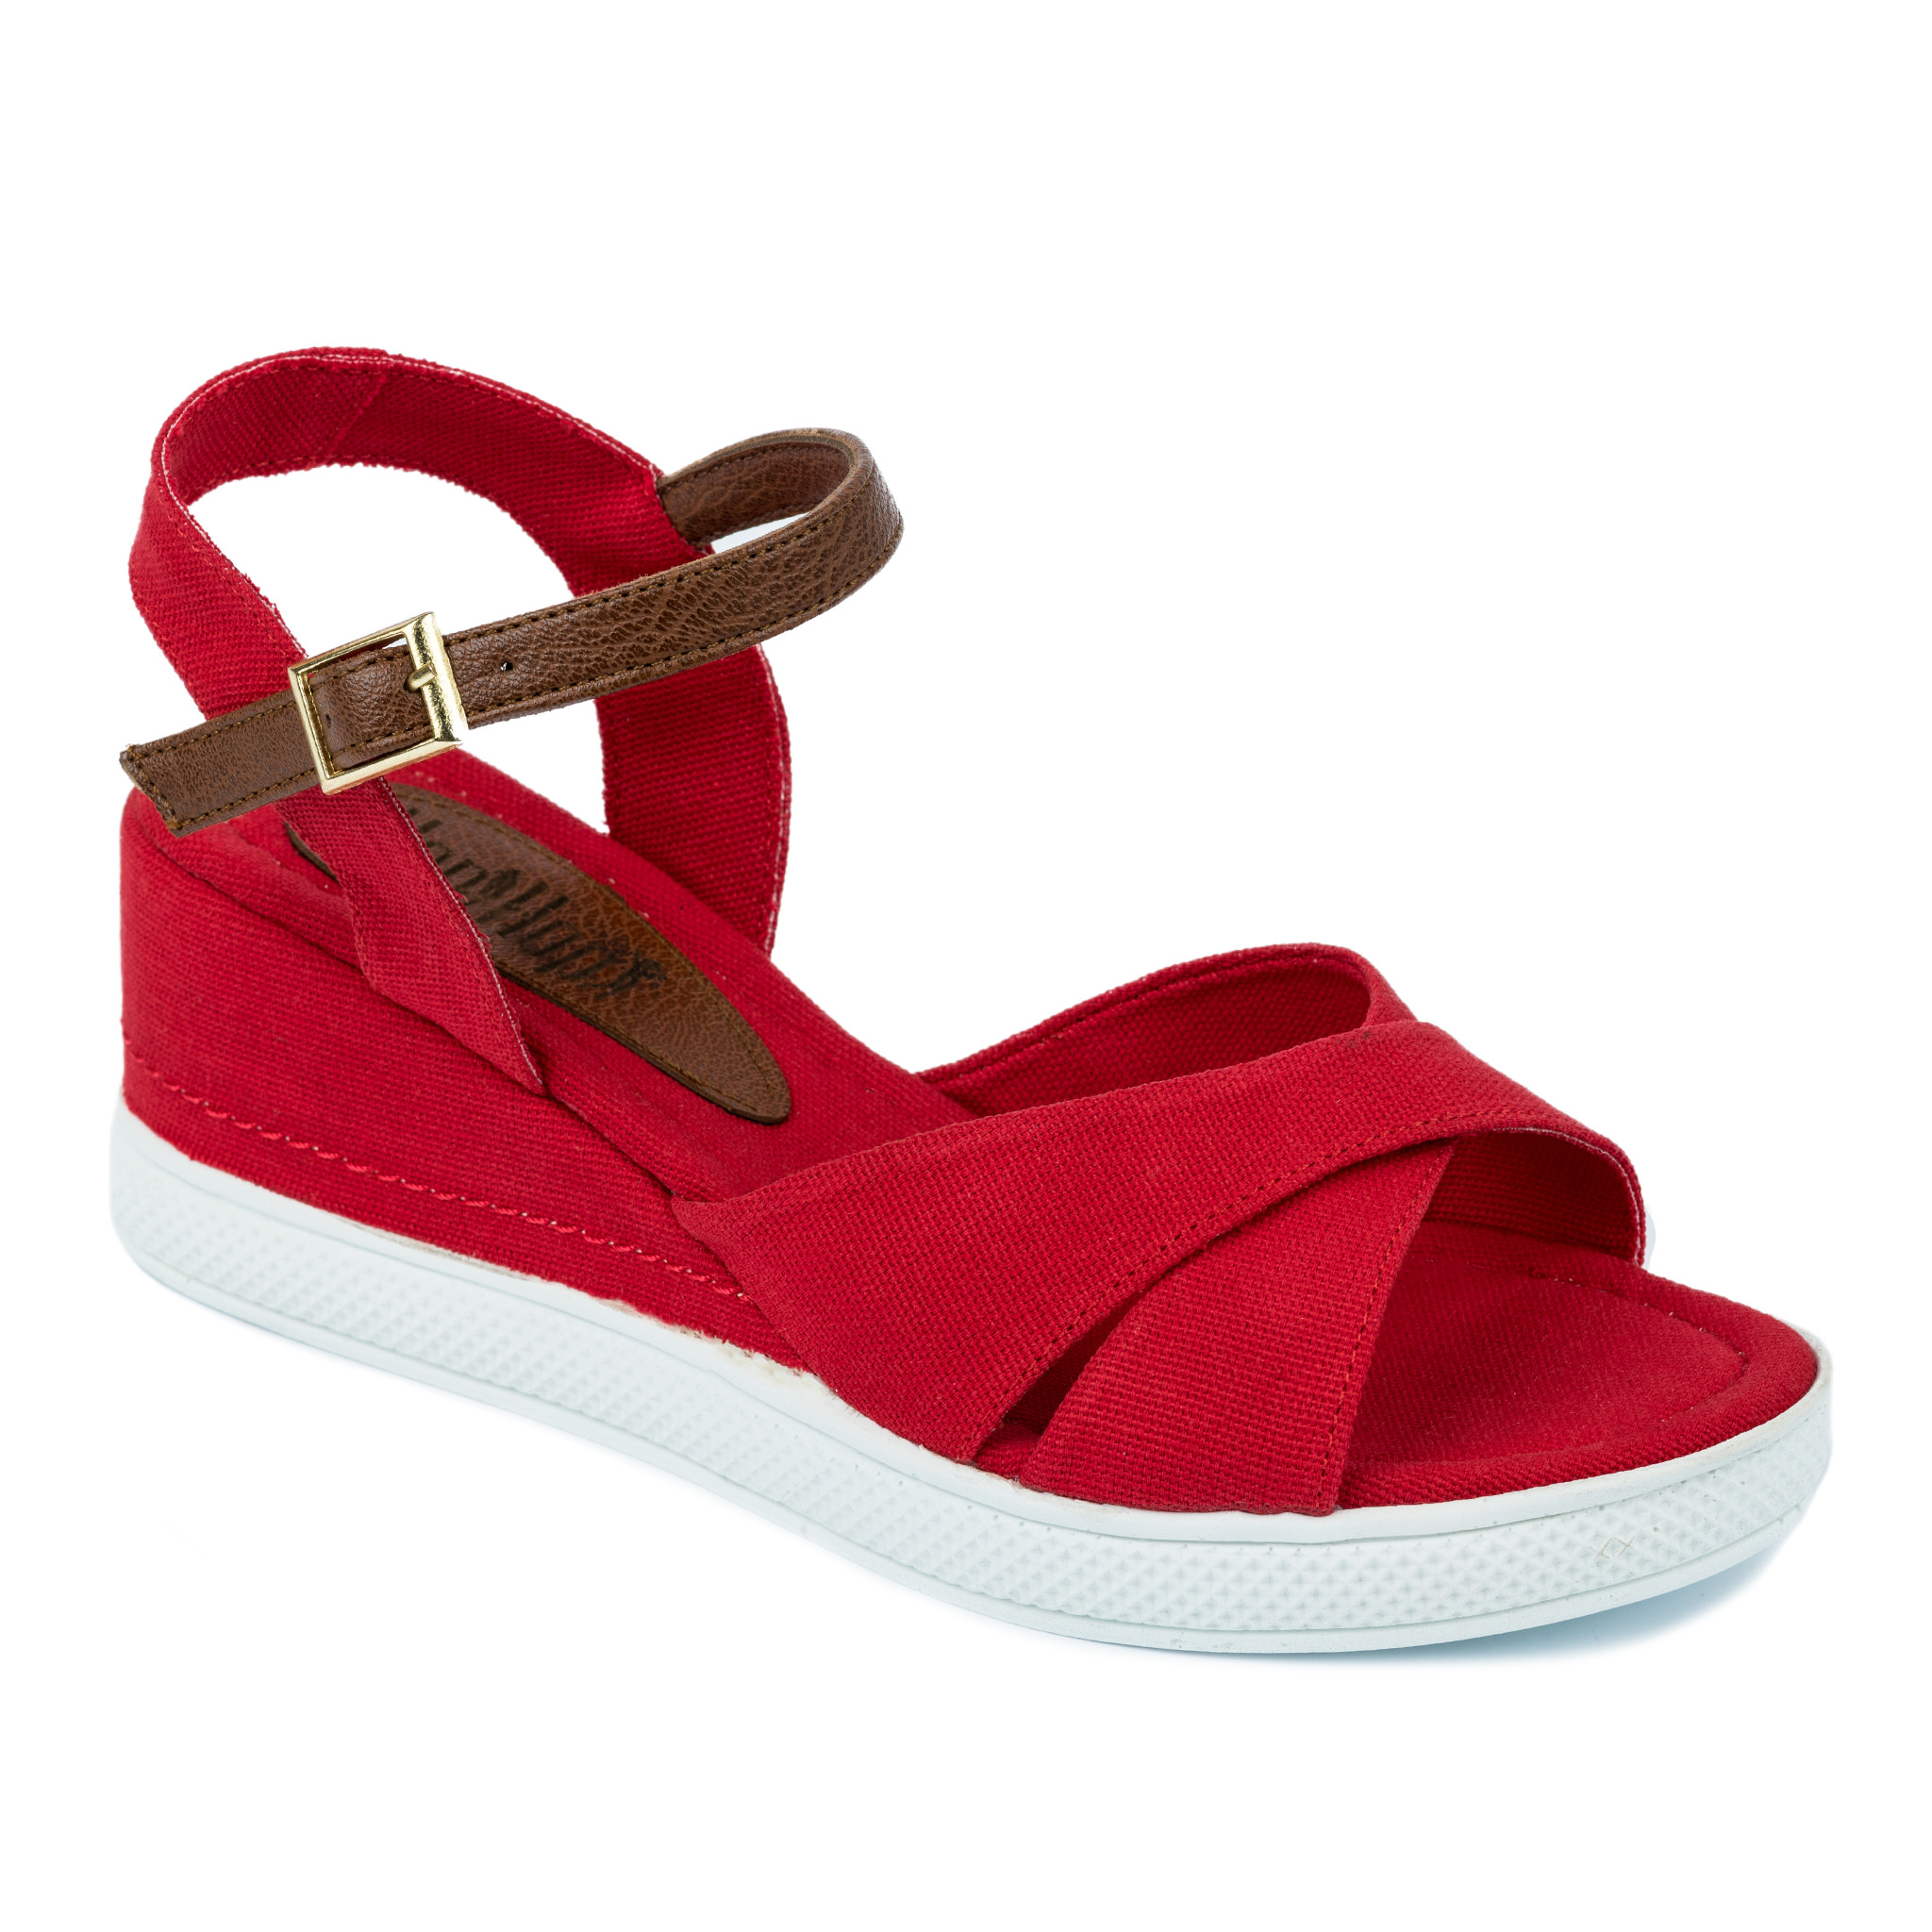 CROSS STRAP WEDGE SANDALS - RED